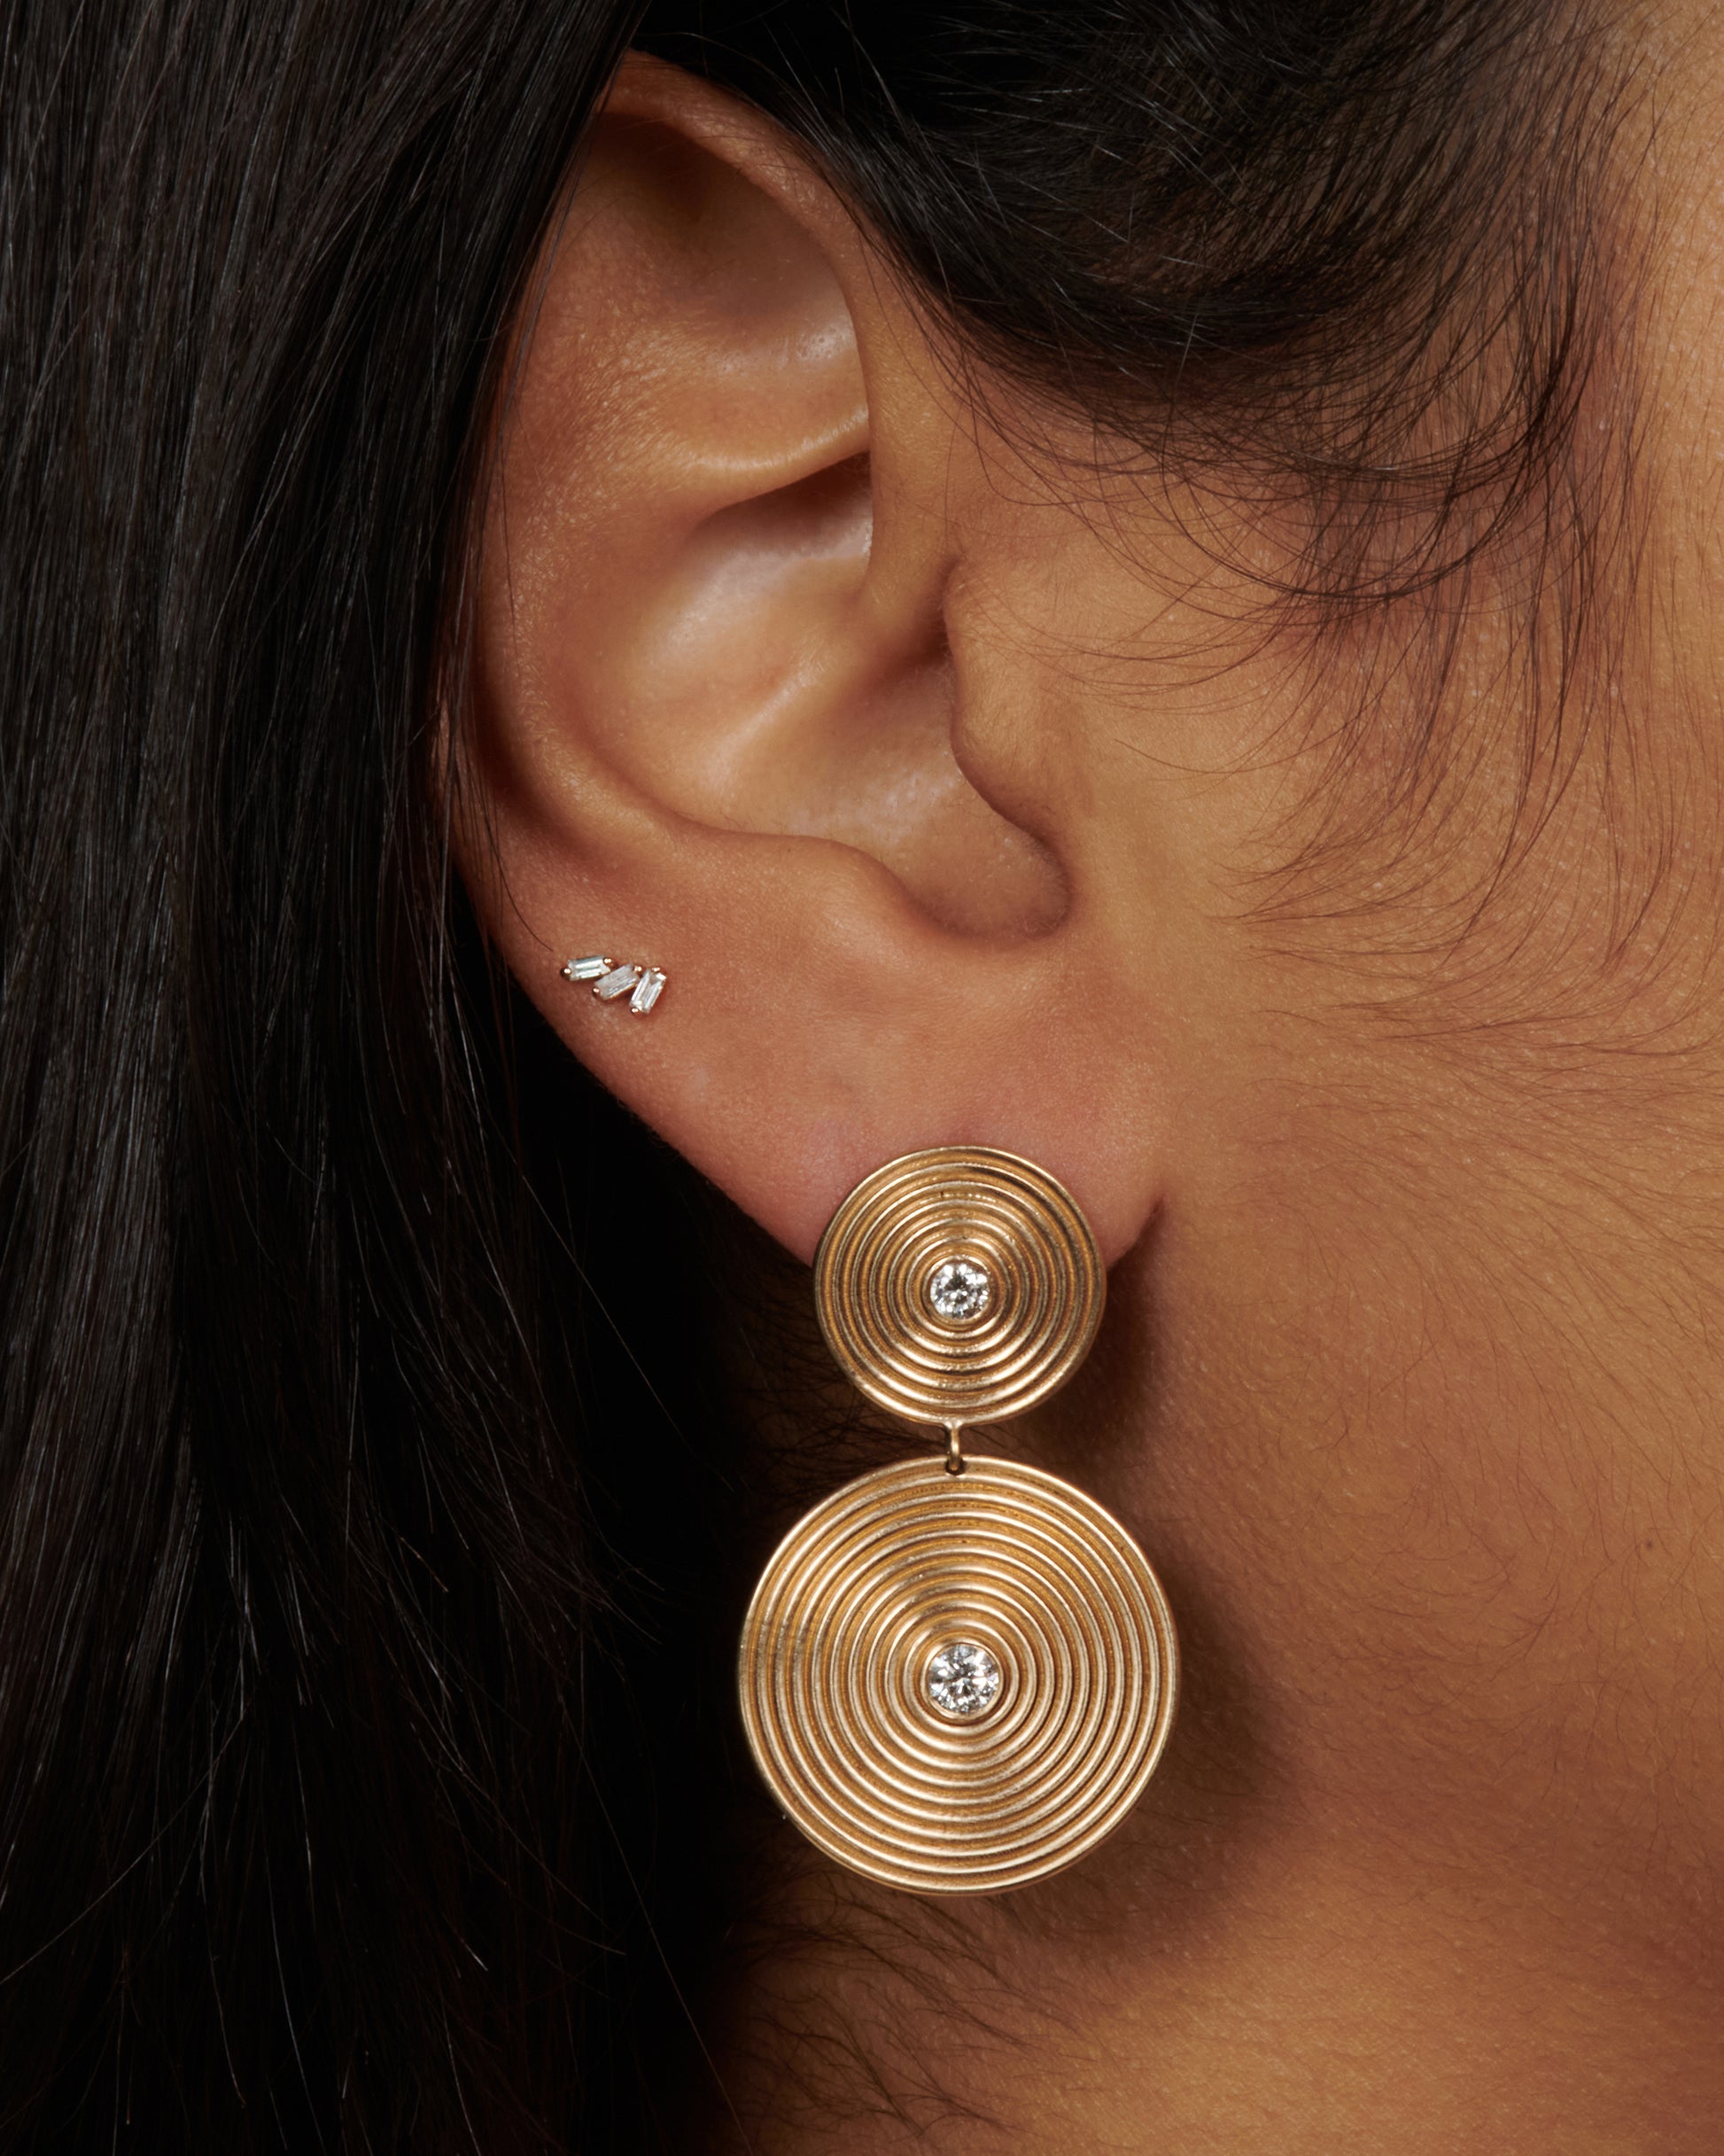 14k gold disc drops, each puntcuated with two white diamonds. The concentric circles are elegant symbols of growth and change.